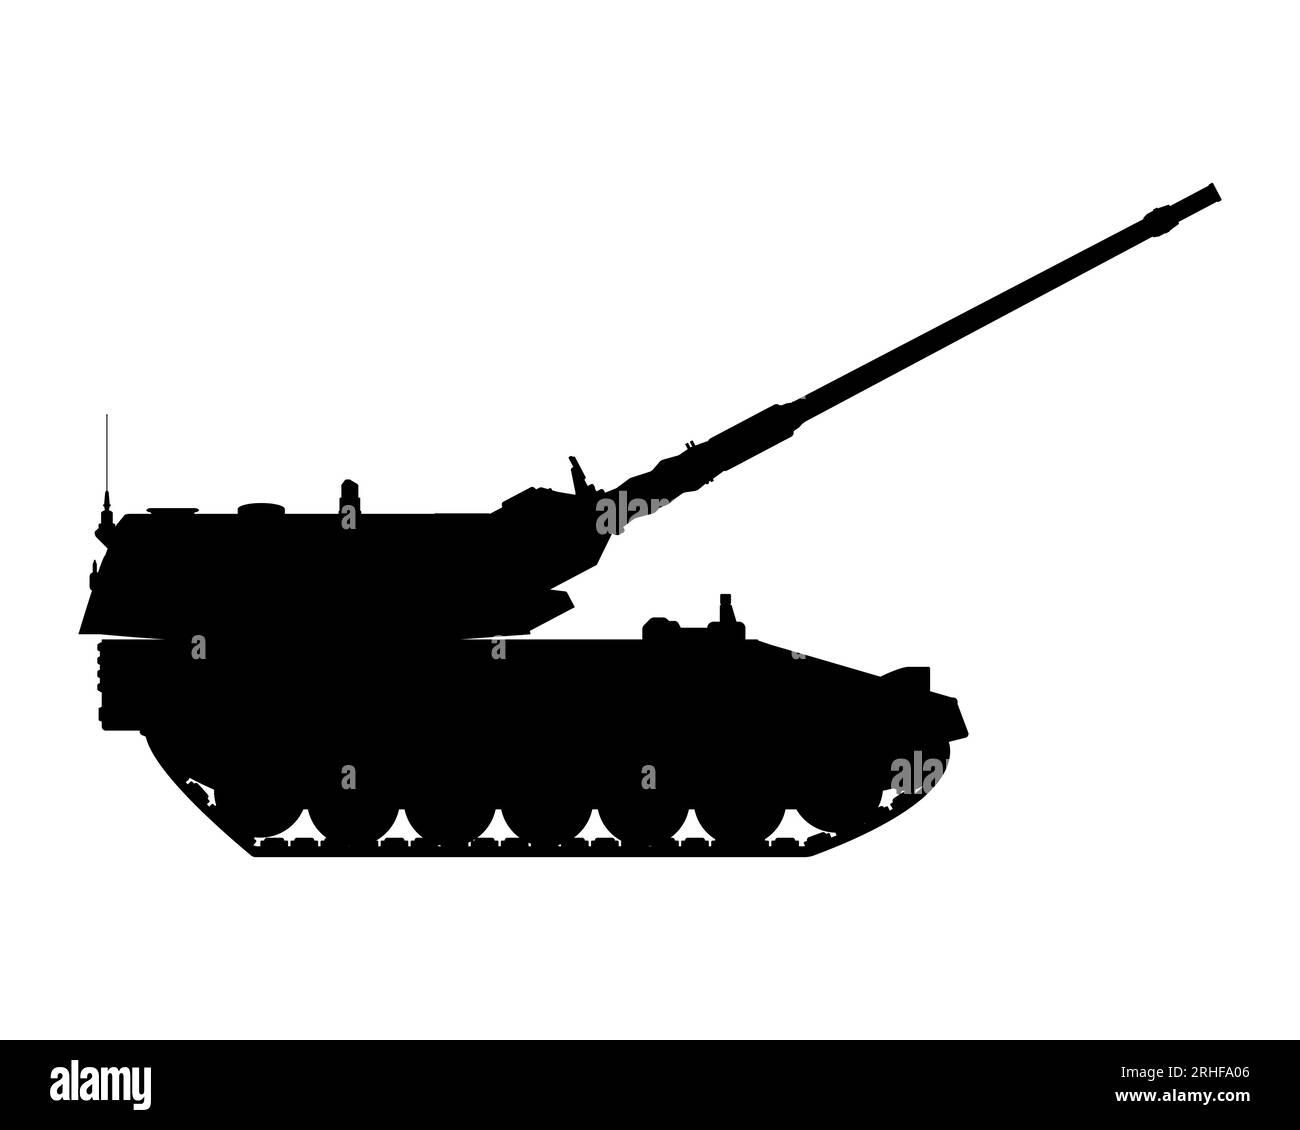 Self-propelled howitzer silhouette. Raised barrel. Military armored vehicle. Vector illustration isolated on white background. Stock Vector